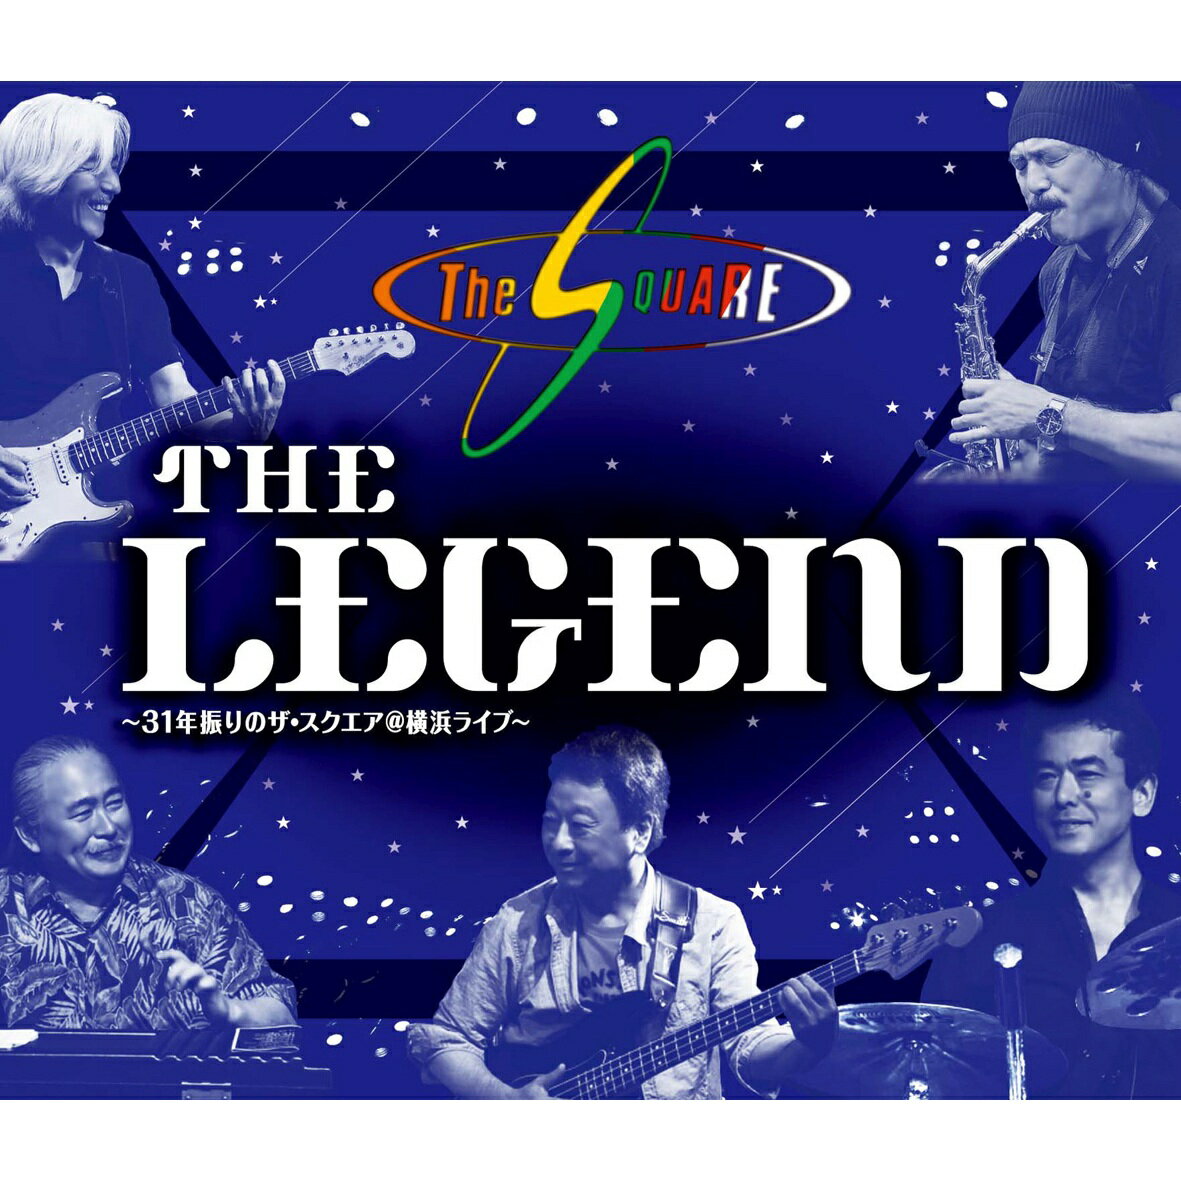 “THE LEGEND” ～31年振りのザ・スクエア@横浜ライブ～【Blu-ray】 [ THE SQUARE ]